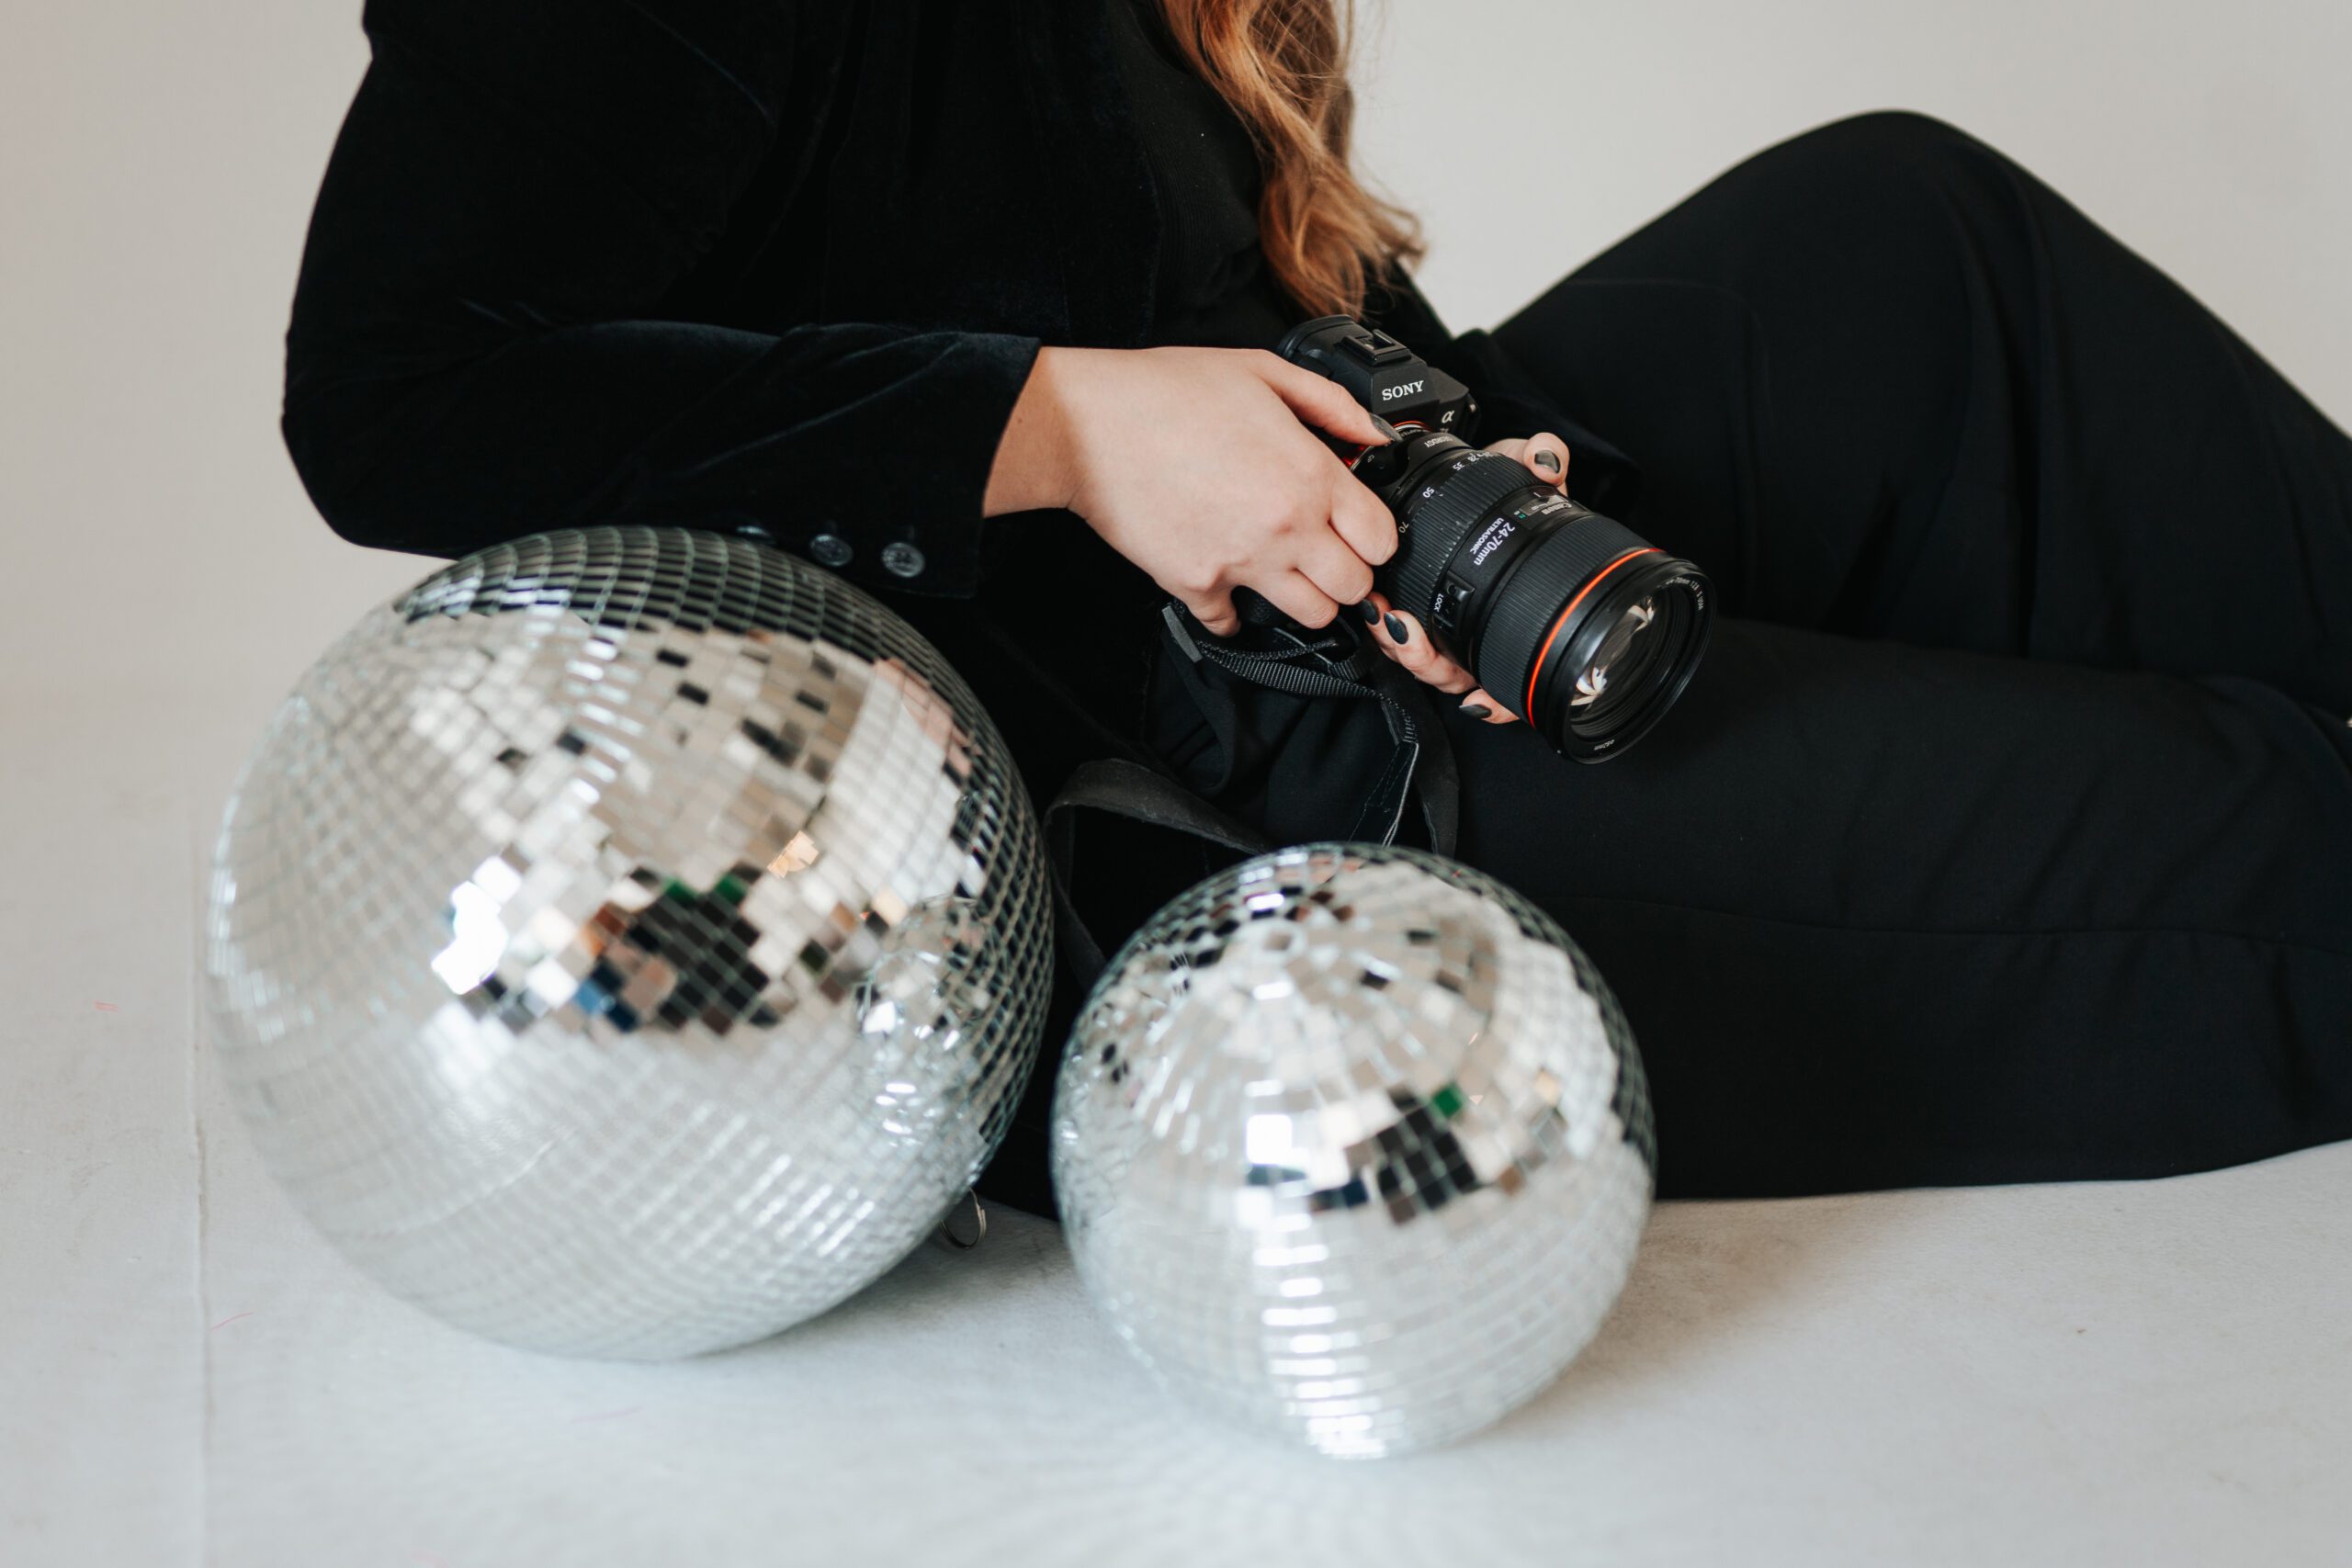 Wedding photographer sitting against white backdrop holding a camera with disco balls in the foreground